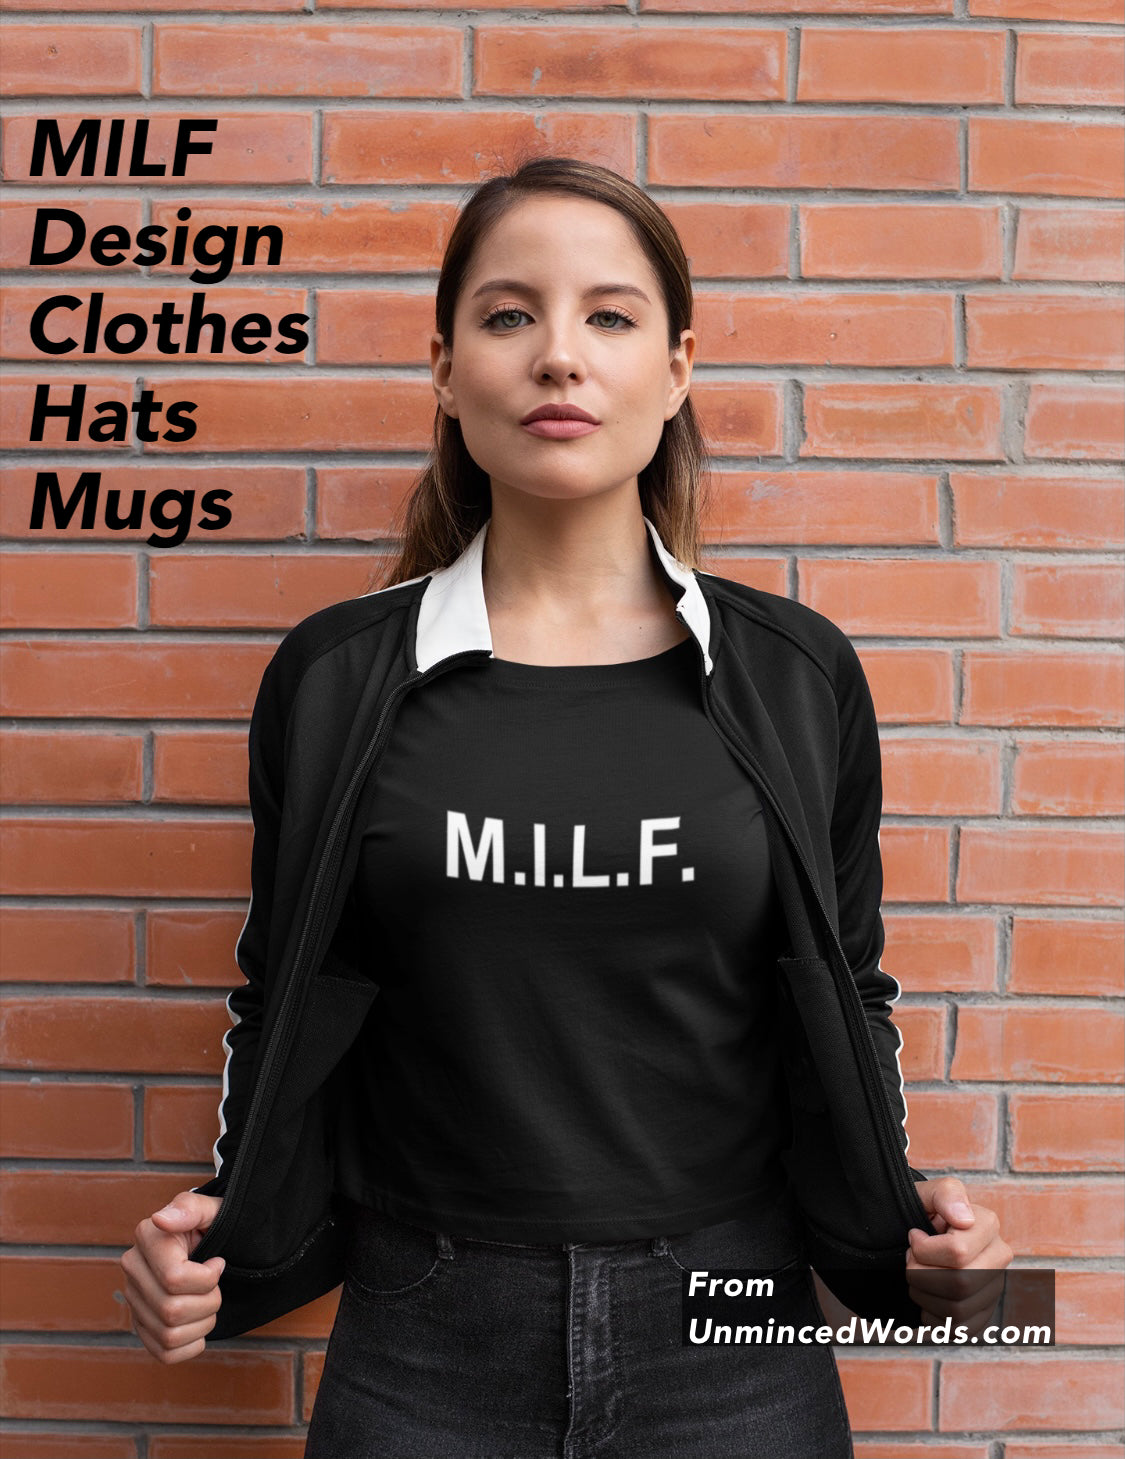 This is the MILF collection from UnmincedWords.com